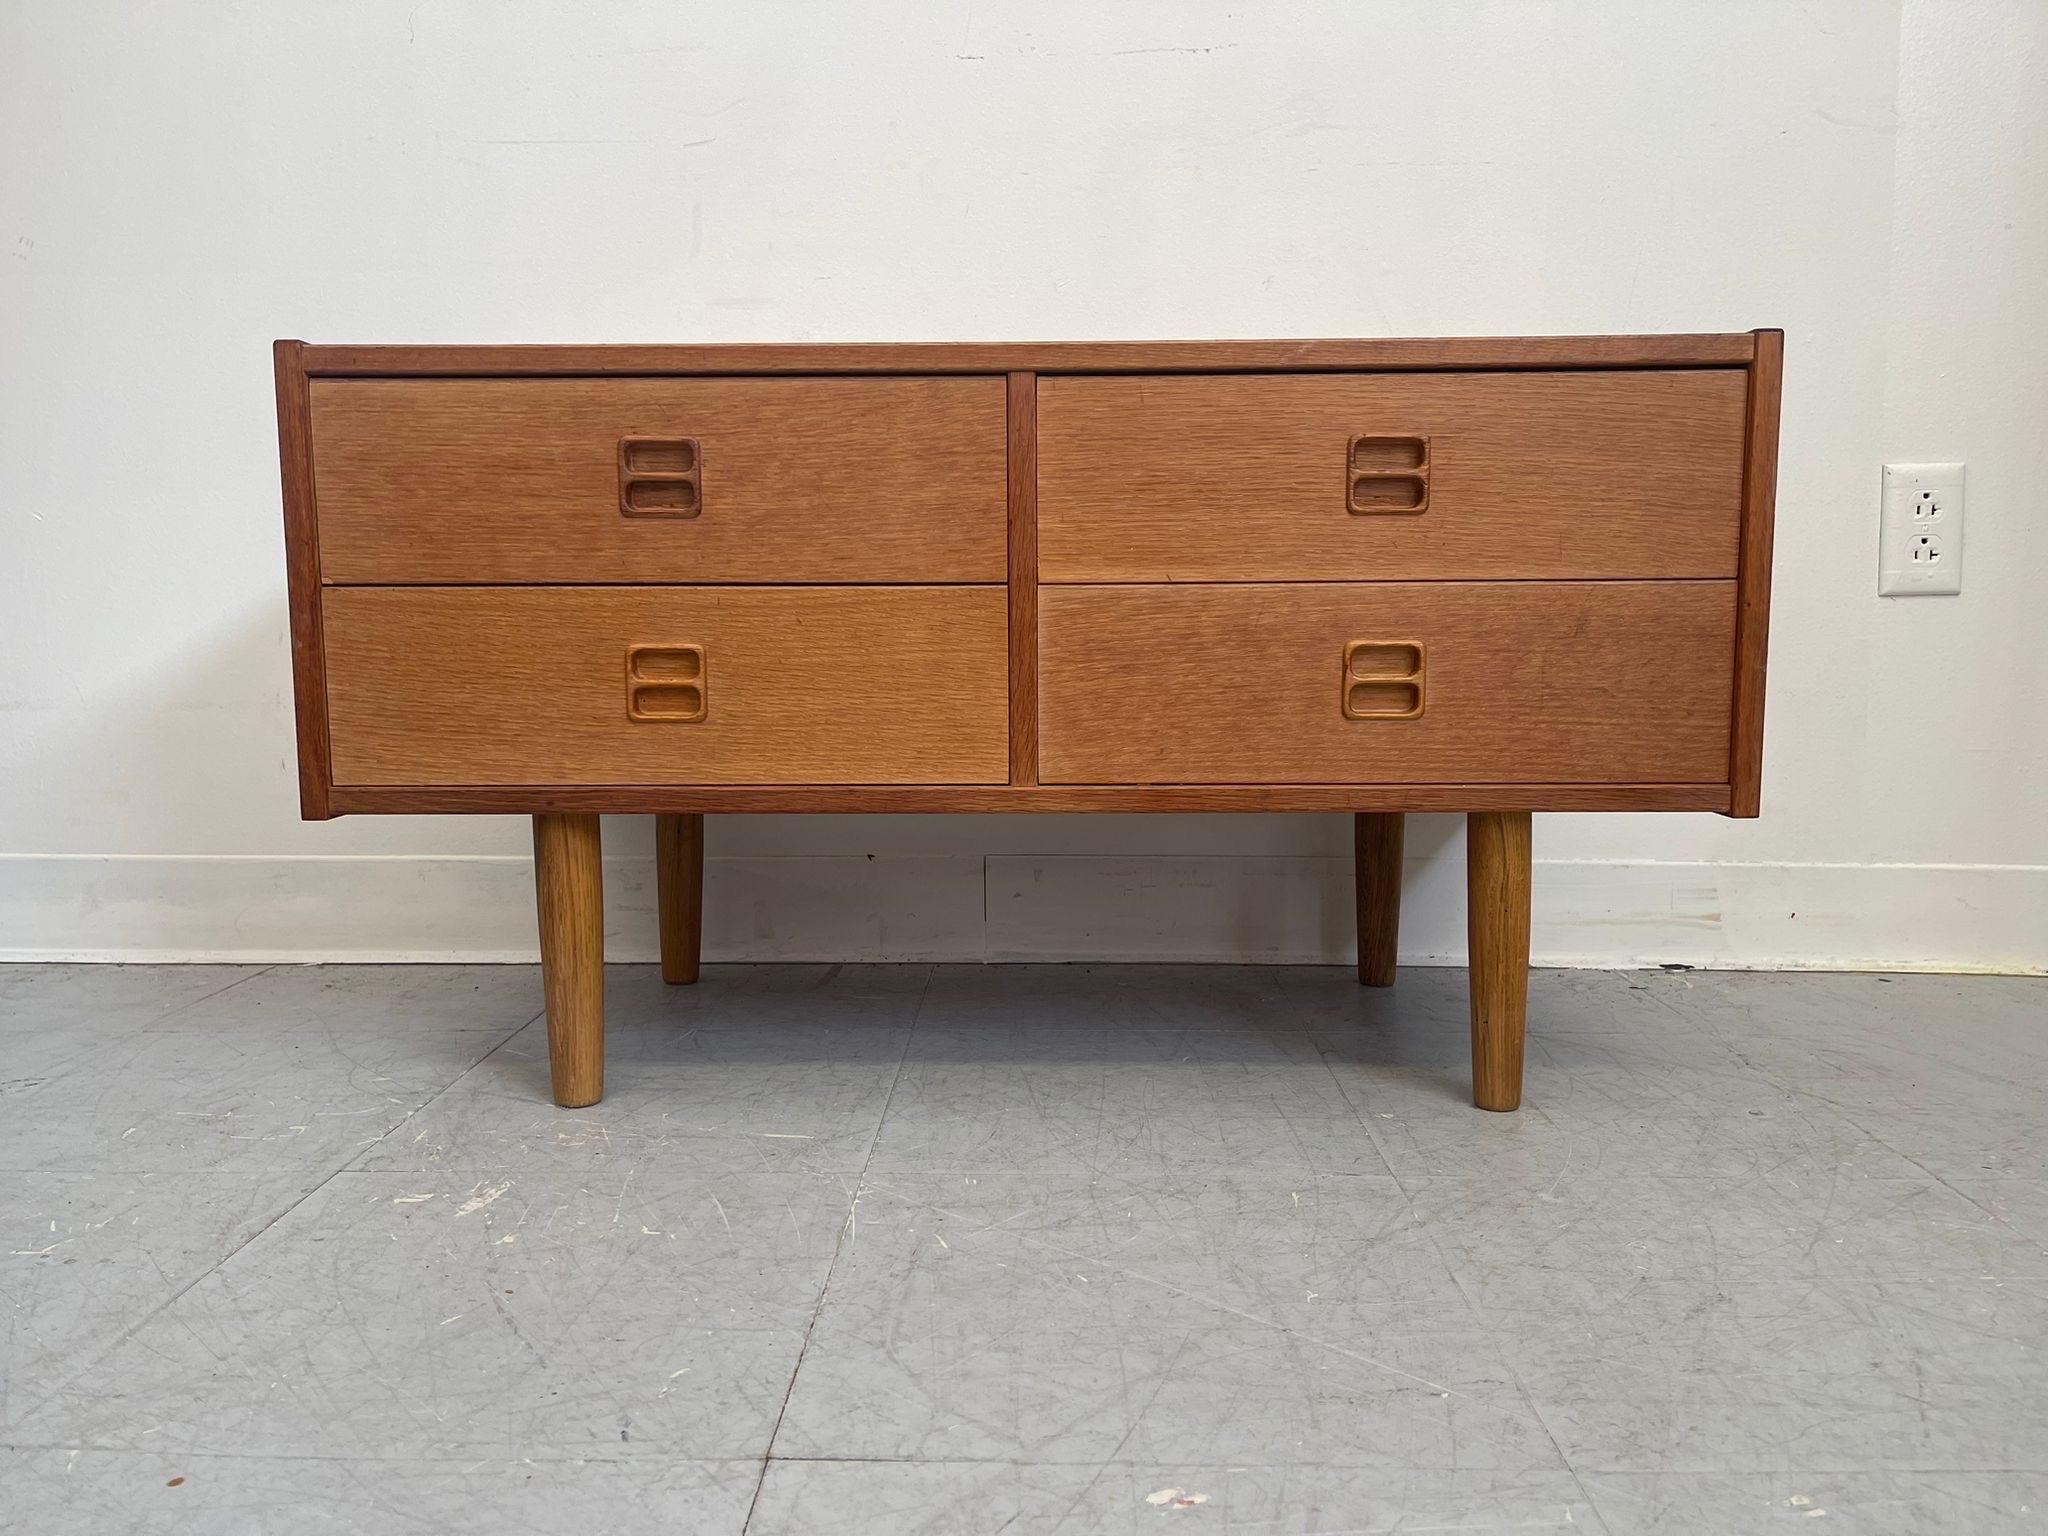 Danish modern dresser with four dovetailed drawers. Petite size, wood carved handles. Vintage Condition Consistent with Age as Pictured.

Dimensions. 35 W ; 16 D ; 19 H